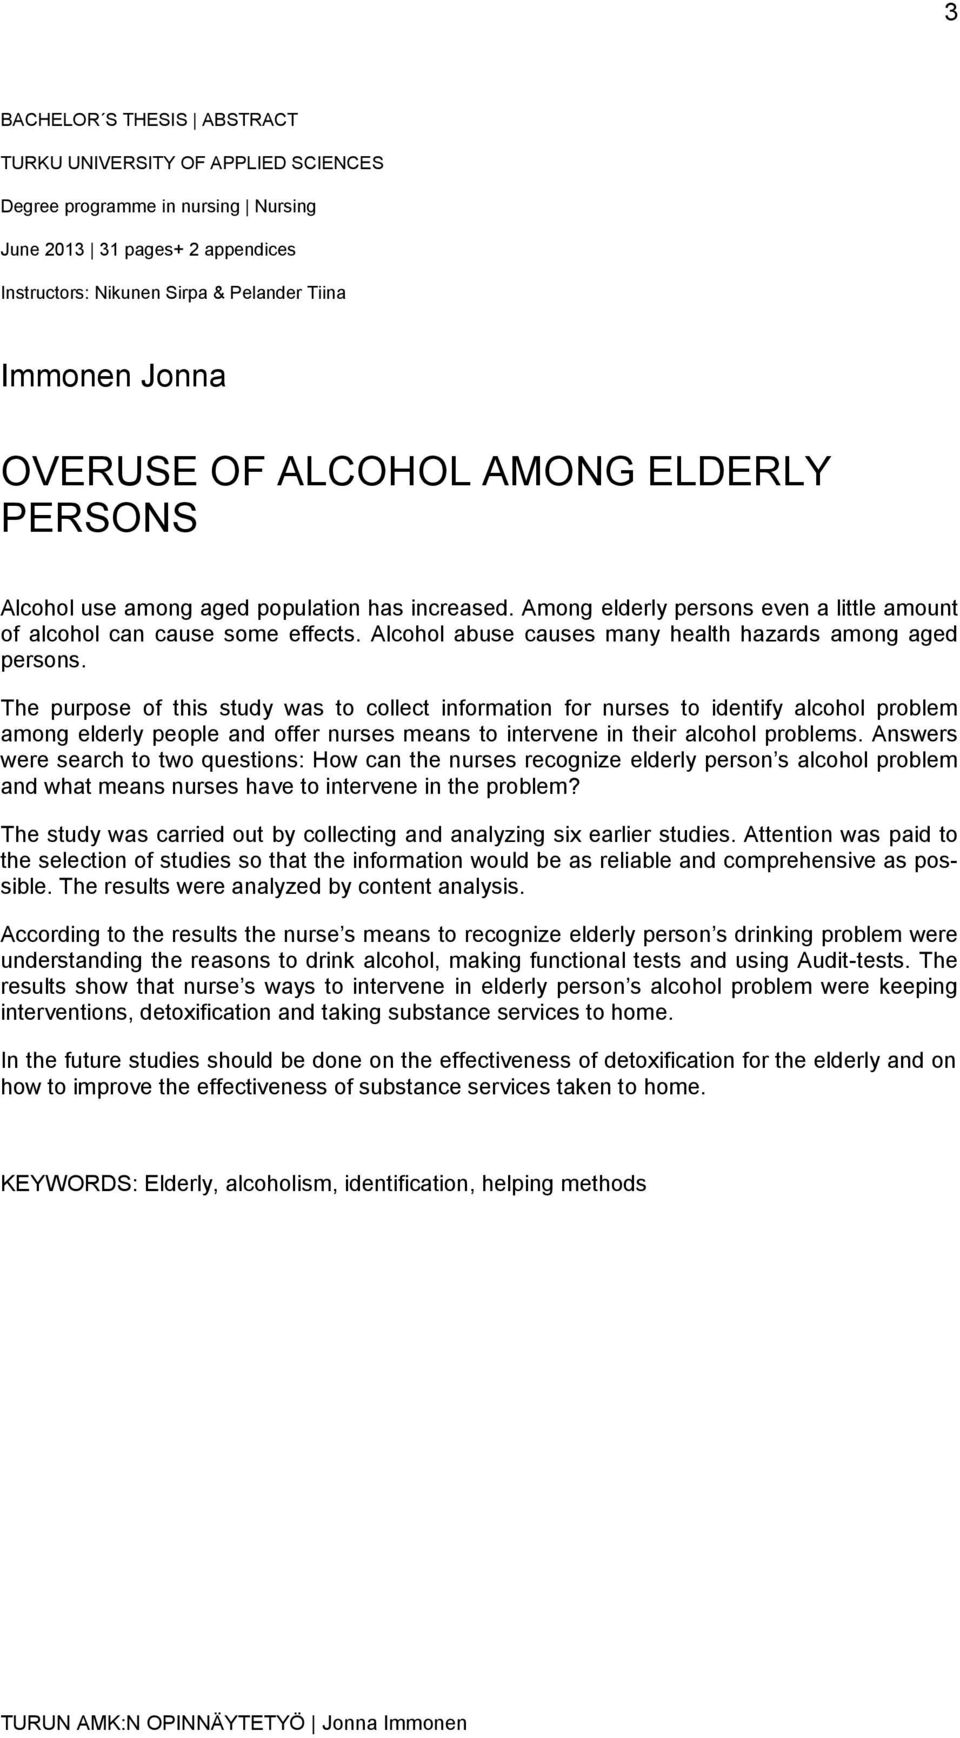 Alcohol abuse causes many health hazards among aged persons.